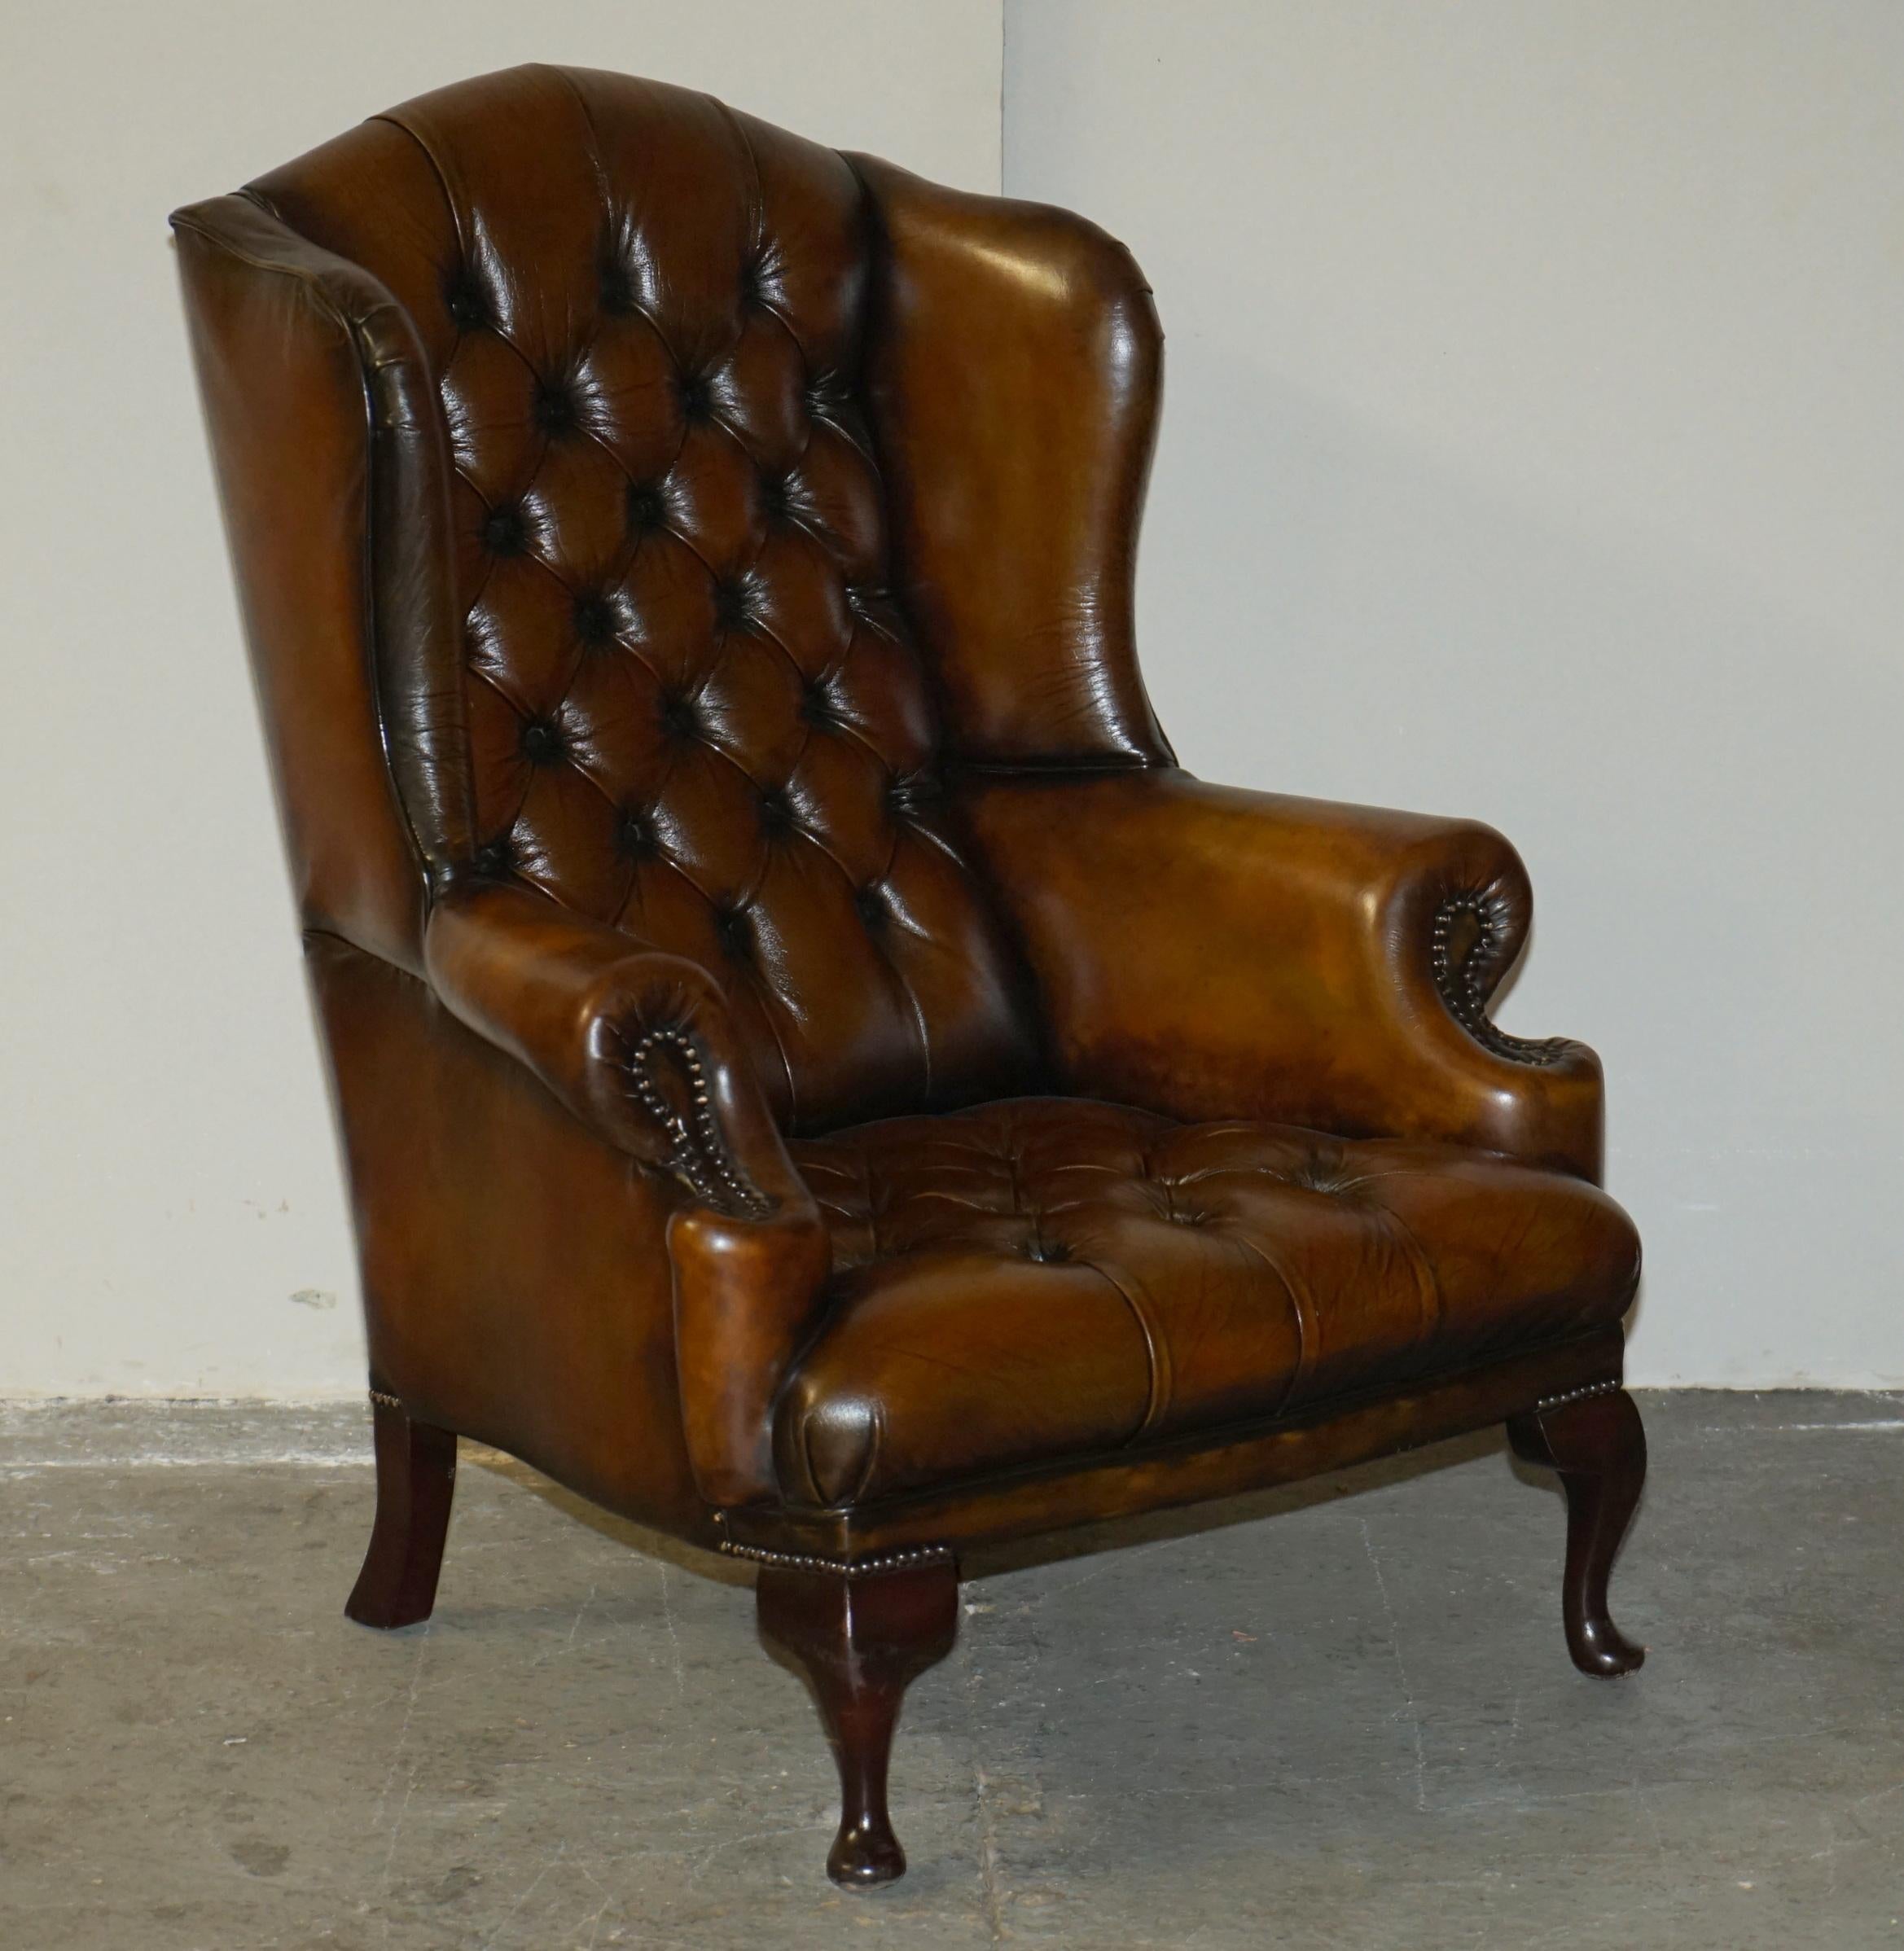 Royal House Antiques

Royal House Antiques is delighted to offer for sale this stunning pair of fully restored, hand dyed Cigar Brown leather William Morris style Wingback armchairs that have been Chesterfield tufted all over 

Please note the